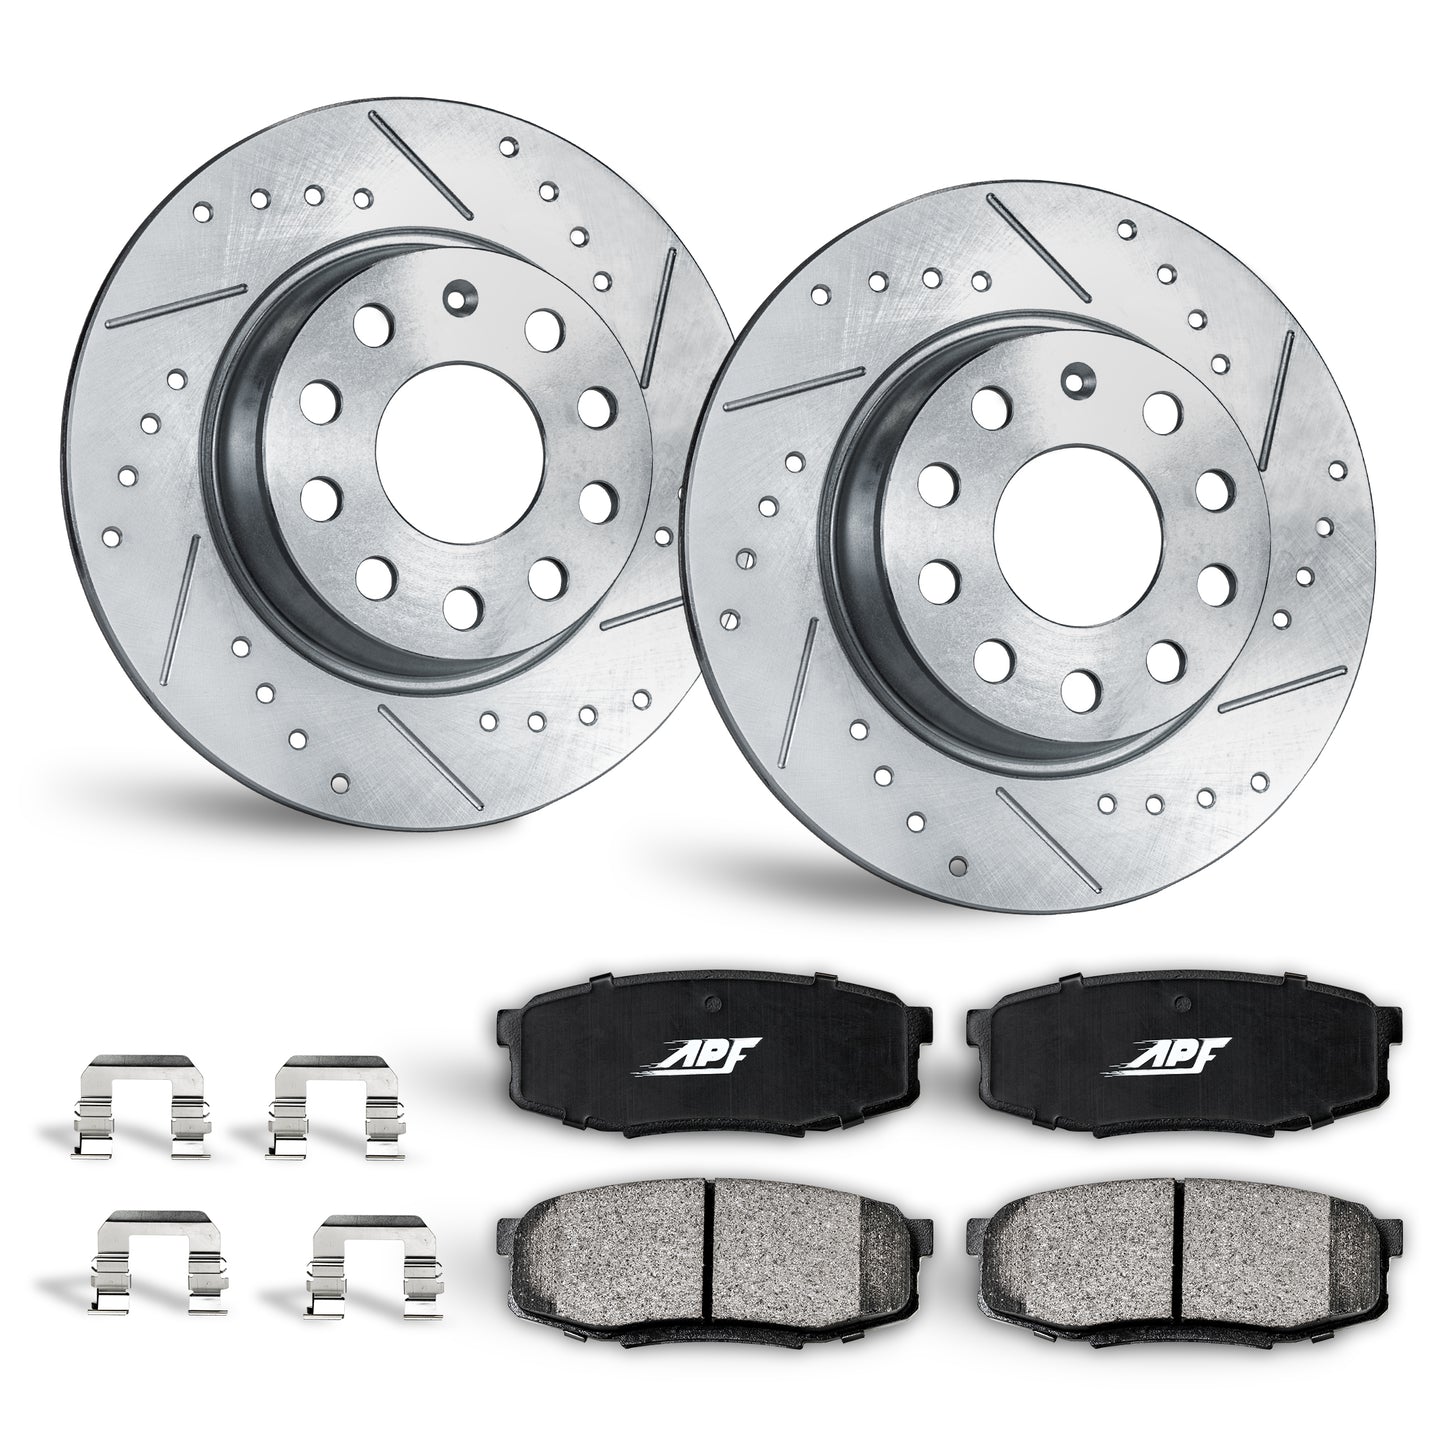 APF Rear Brake Kit compatible with Volkswagen Passat 2012-2015 | Zinc Drilled Slotted Rotors with Ceramic Carbon Fiber Brake Pads